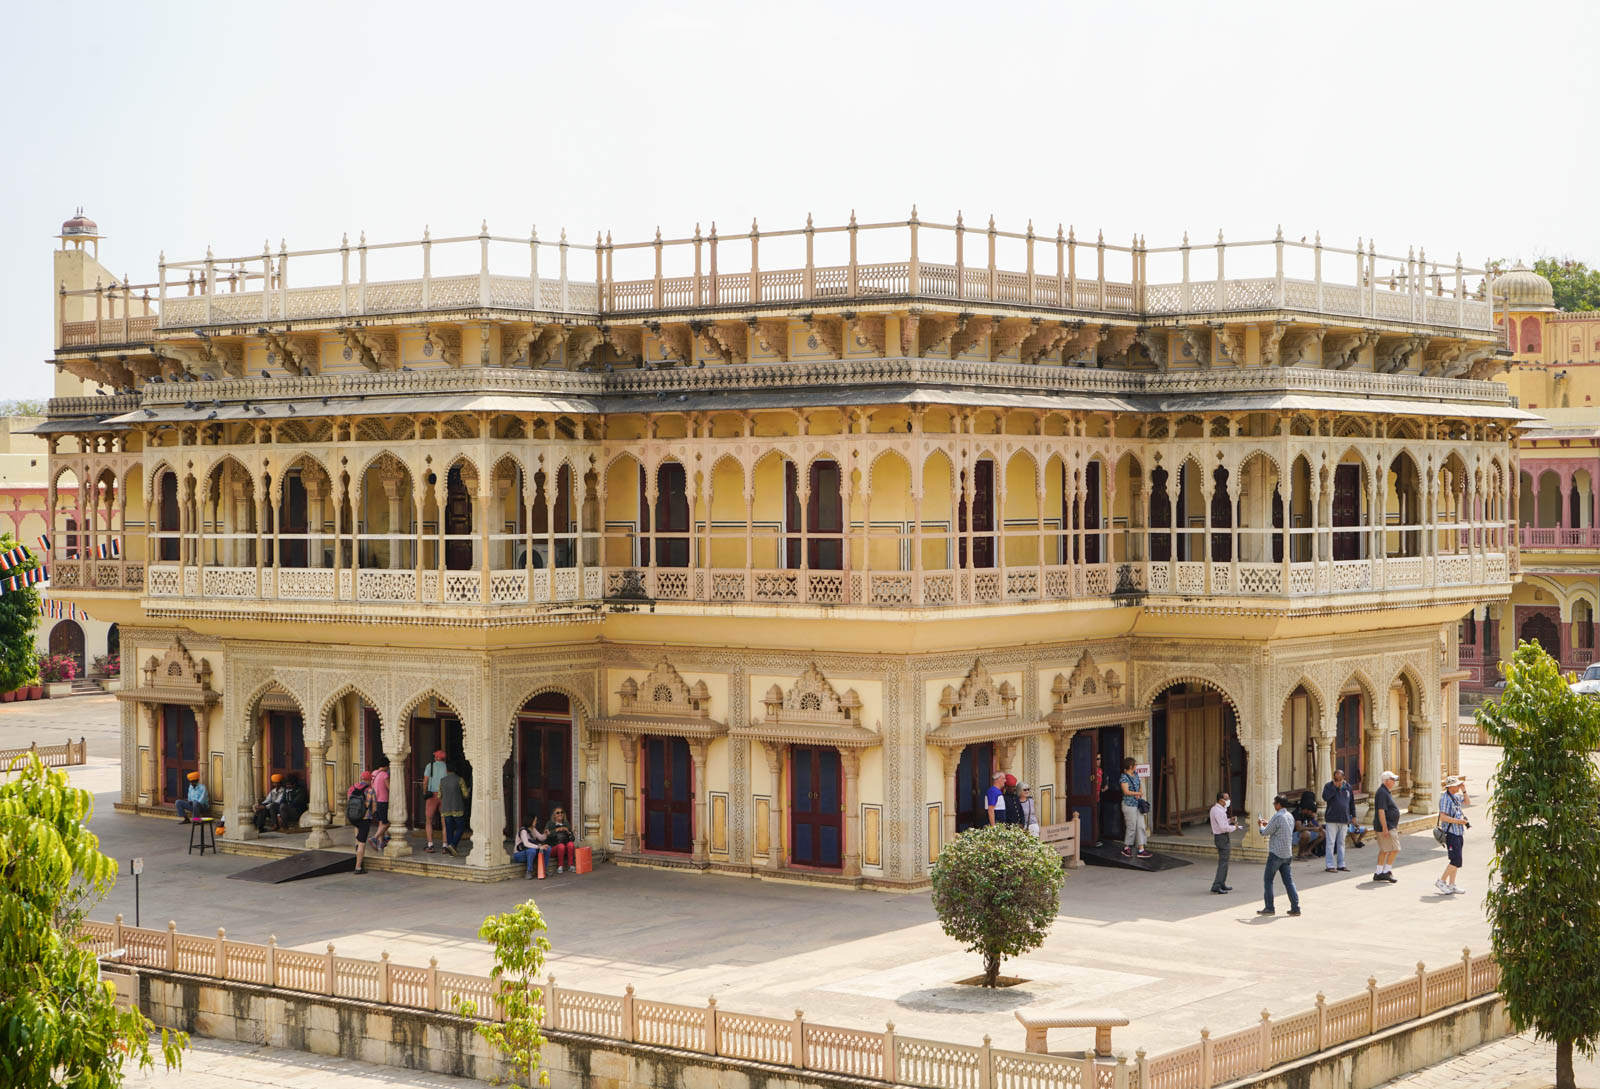 A building in the city palace in Jaipur